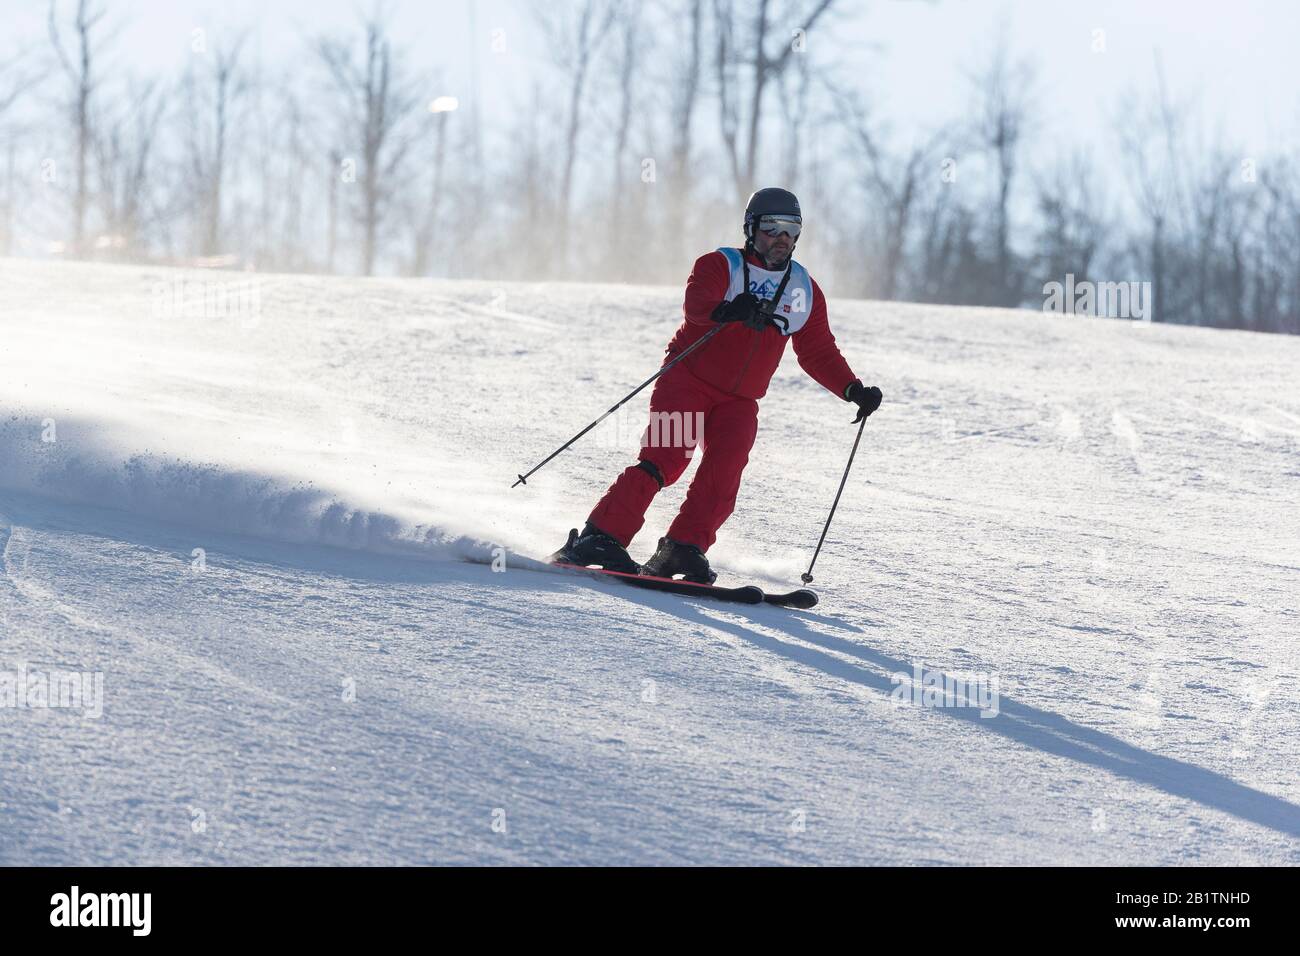 Downhill skiing and snowboarding Stock Photo